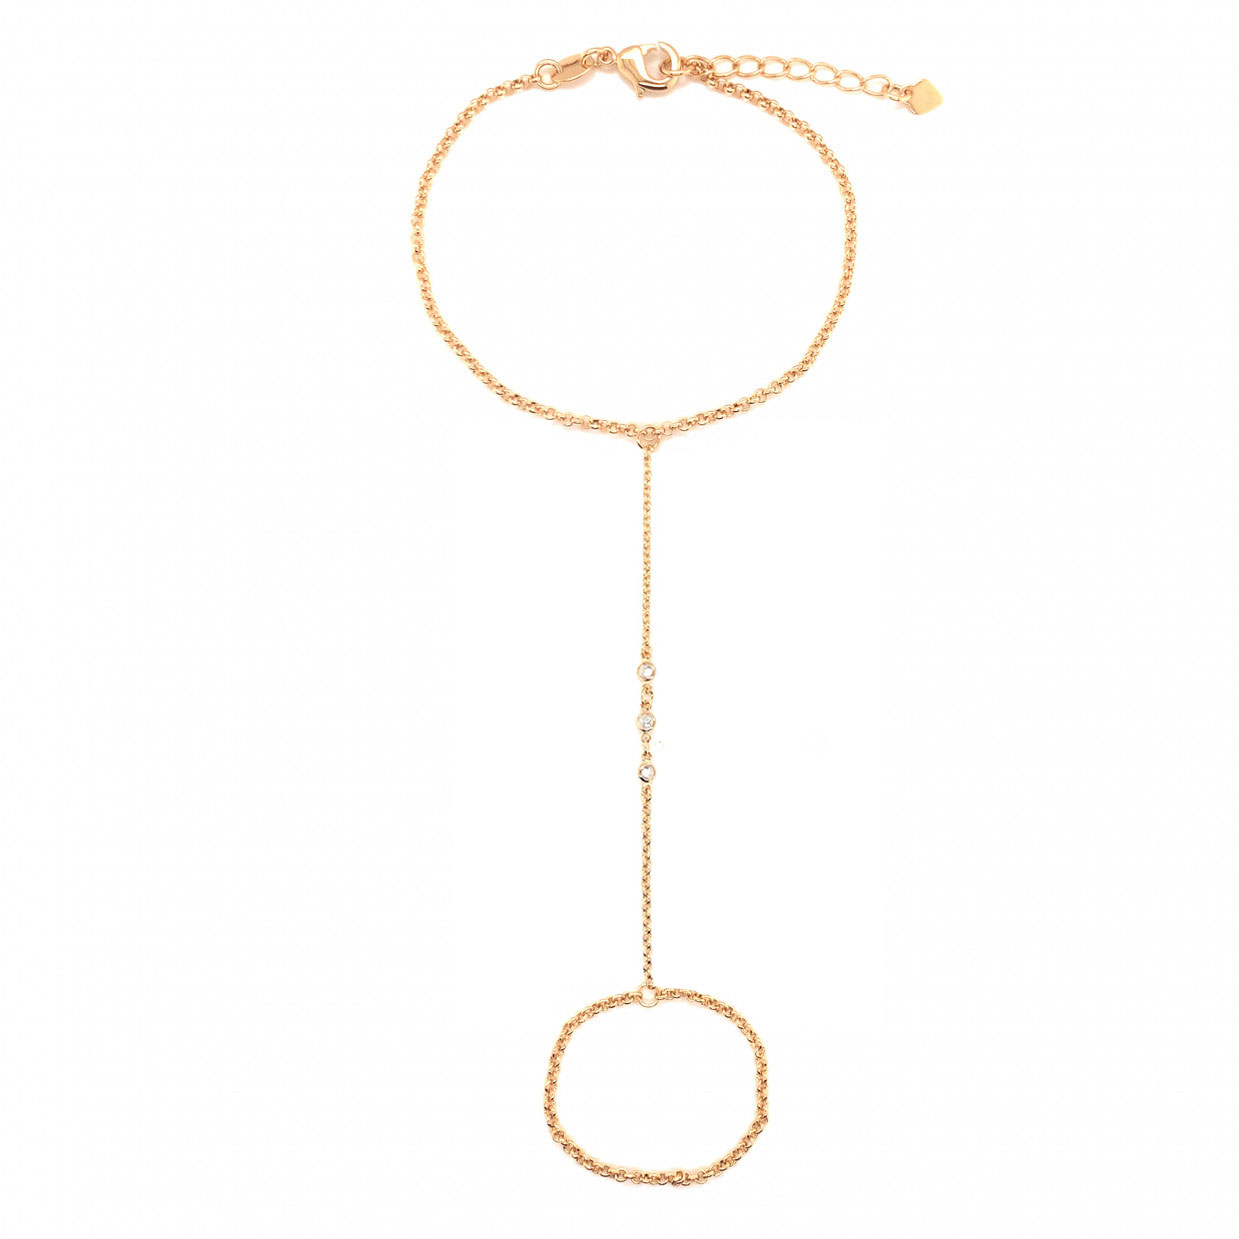 CZ Hand Chain 7" + 1.5" Extension - Gold Filled